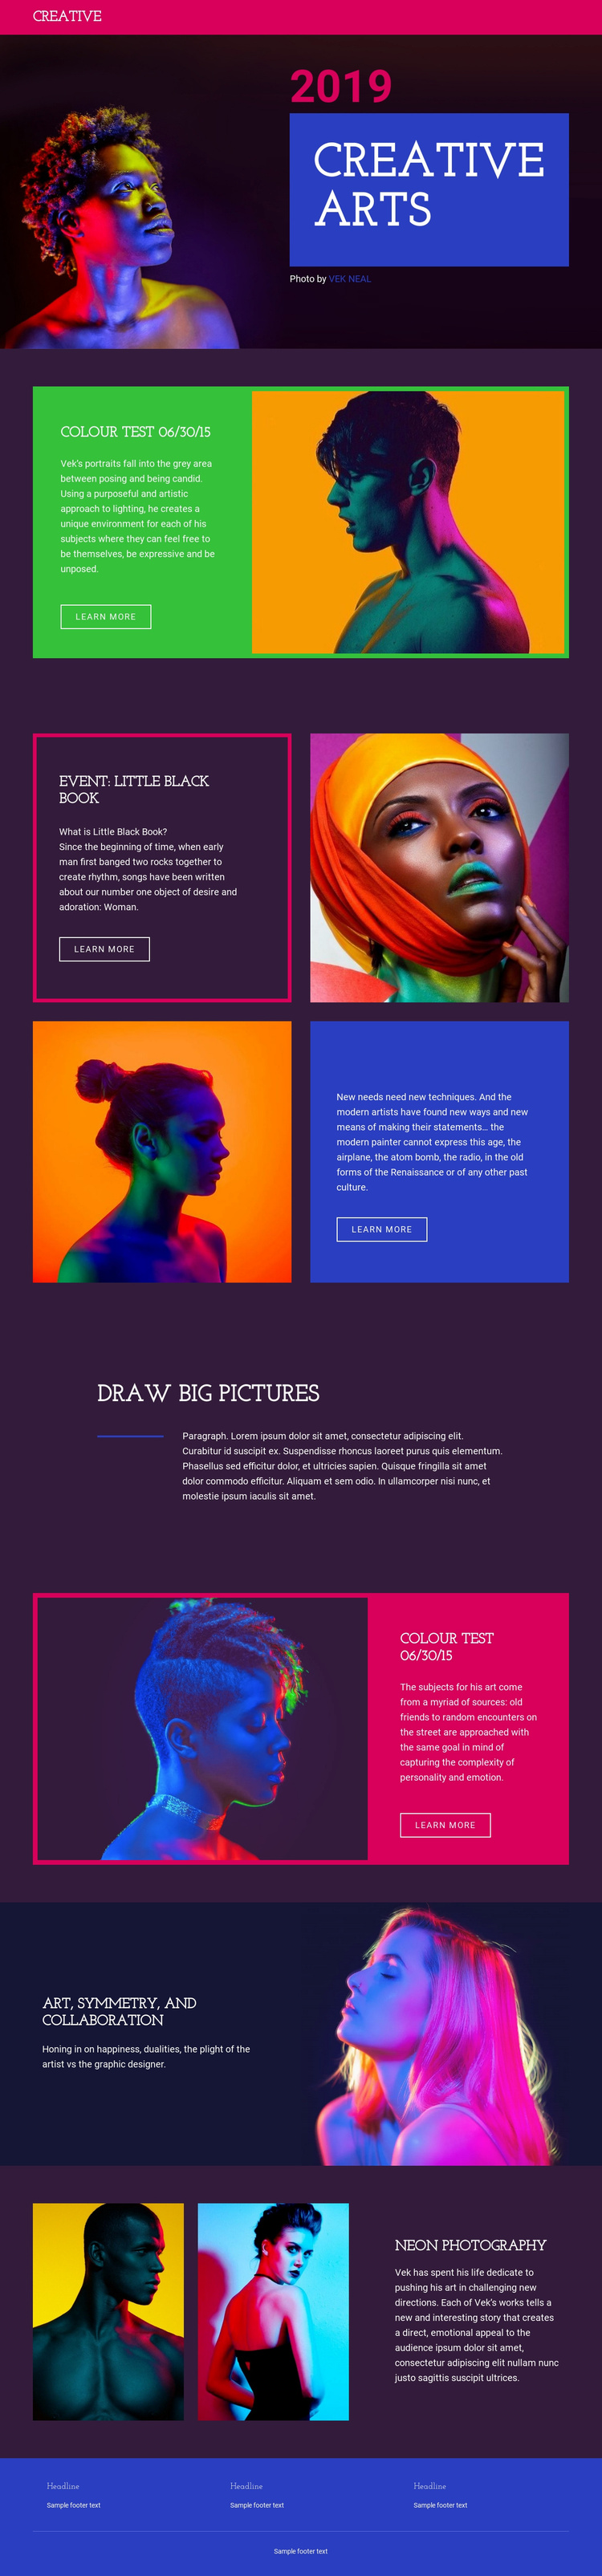 Limited-edition photography Joomla Template